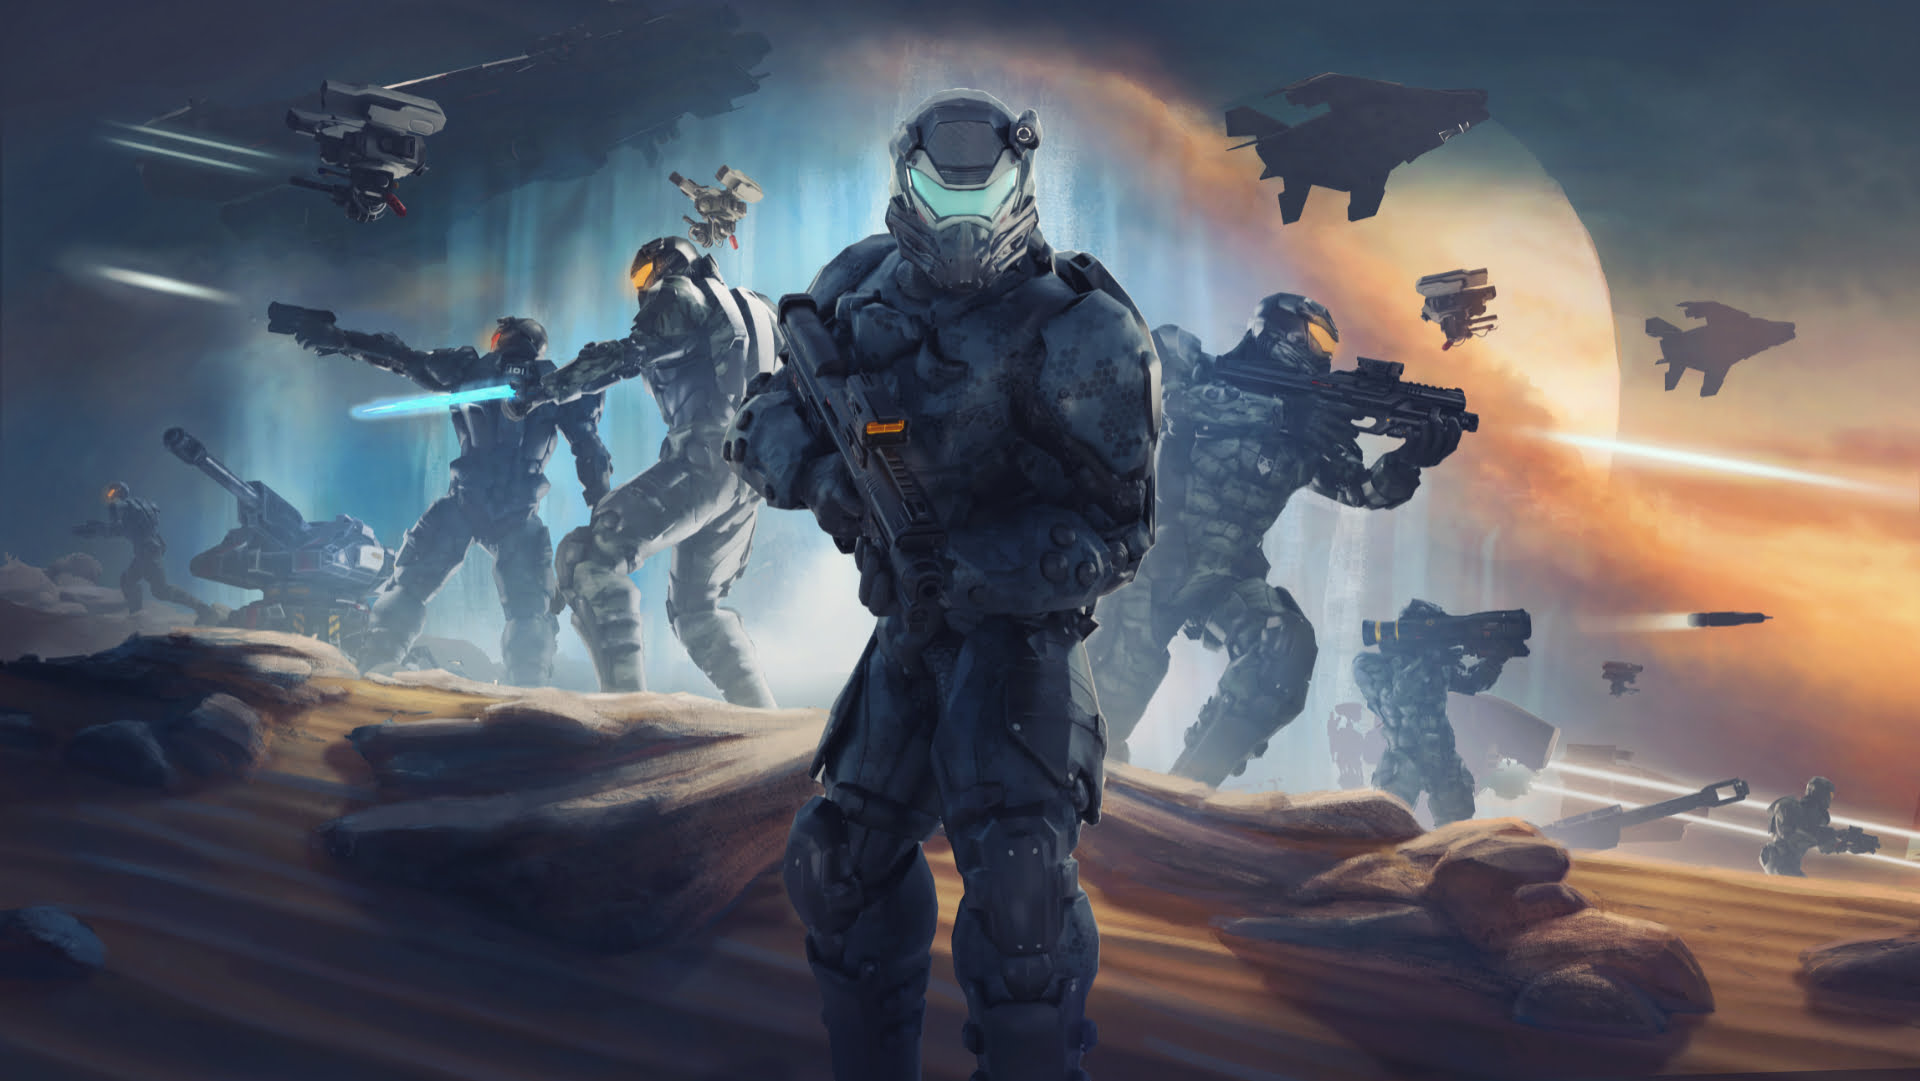 Guardians Frontline review: Halo meets Starcraft in virtual reality